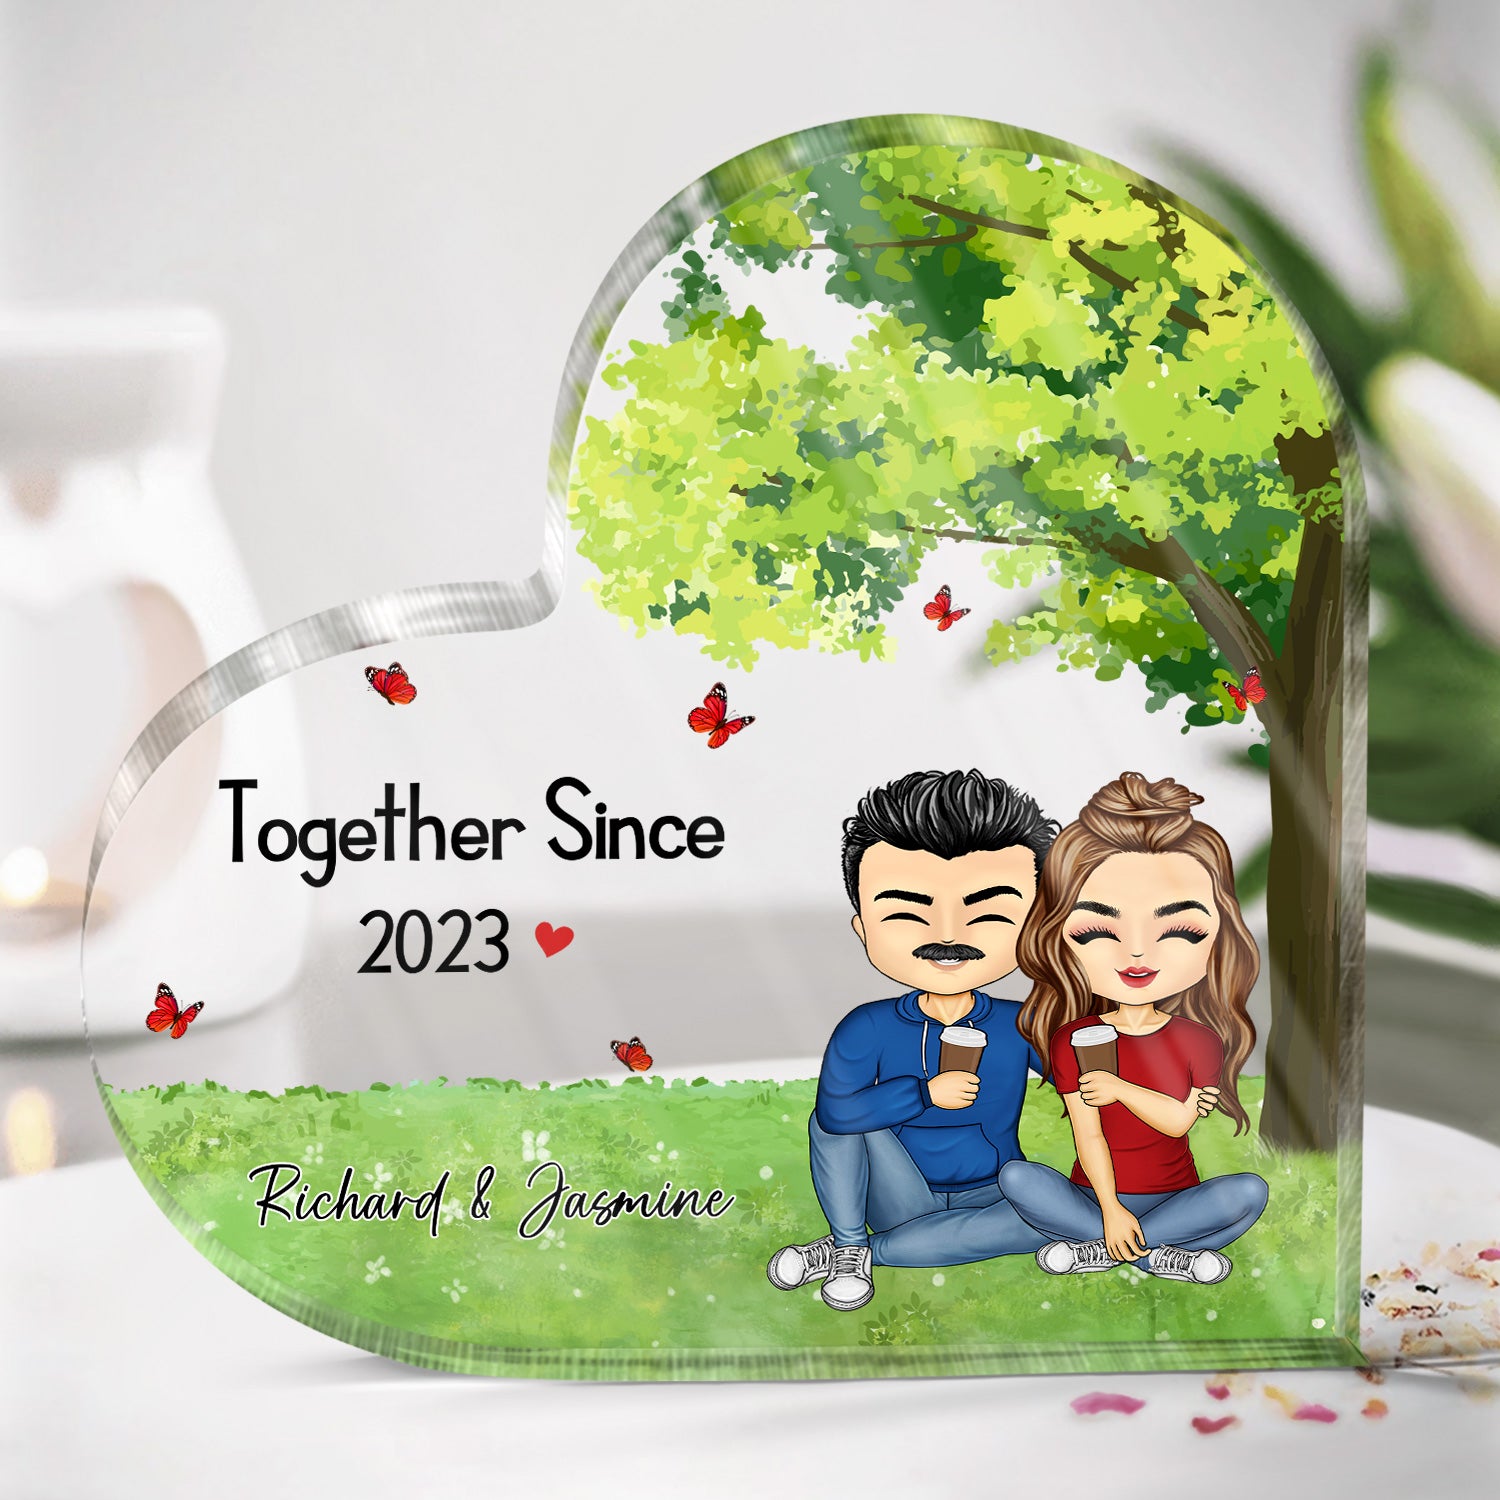 Together Since - Anniversary Gift For Couples - Personalize Heart Shaped Acrylic Plaque